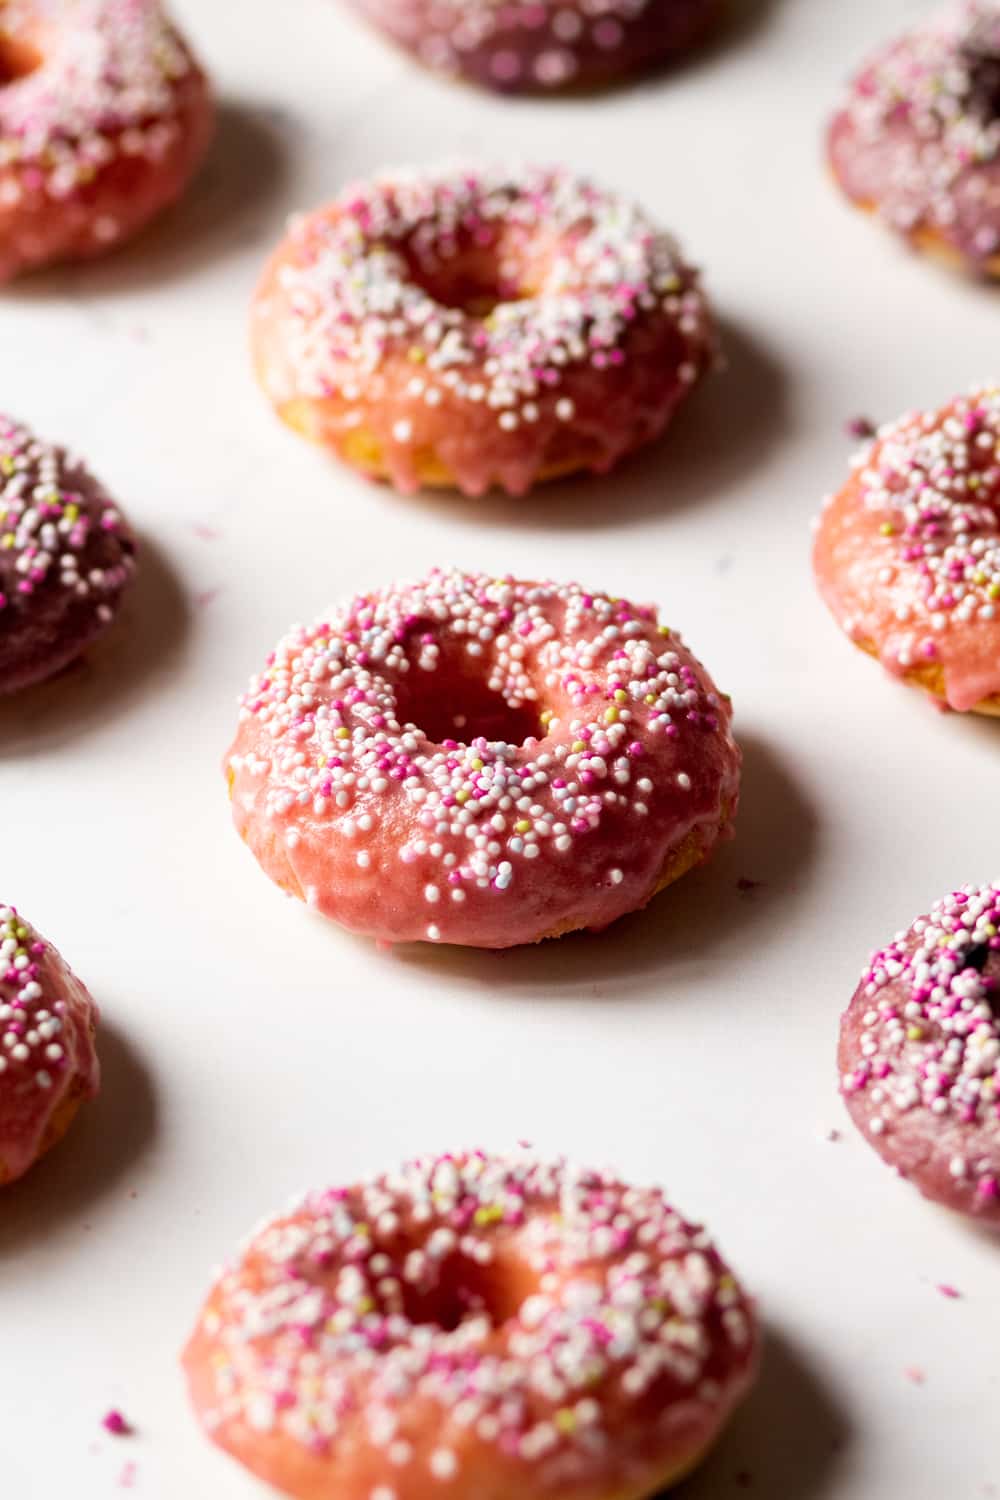 A row of three vegan donuts with pink glaze and white, pink, and yellow ball sprinkles on top. The donuts are on a white counter with parts of donuts surrounding them.